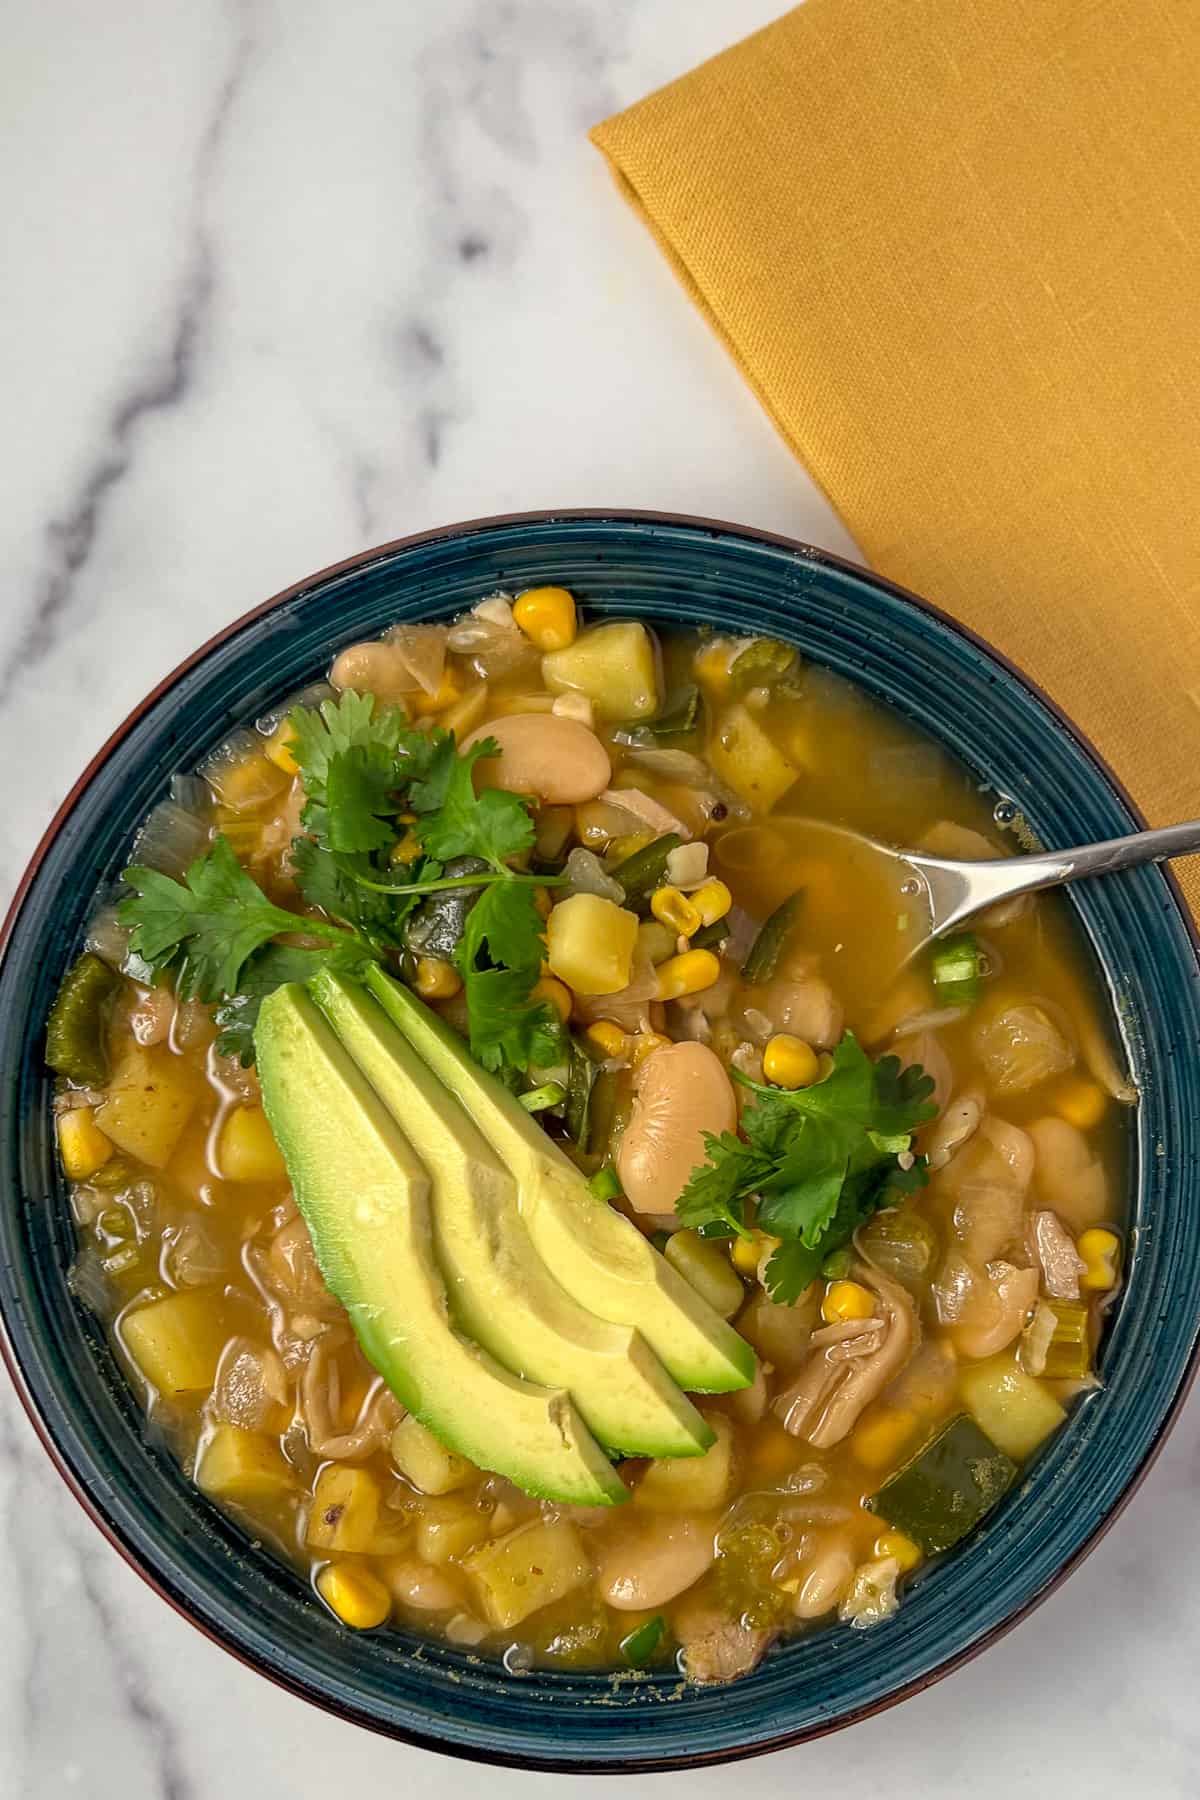 Bowl of white bean chili with sliced avocado and fresh cilantro on top.